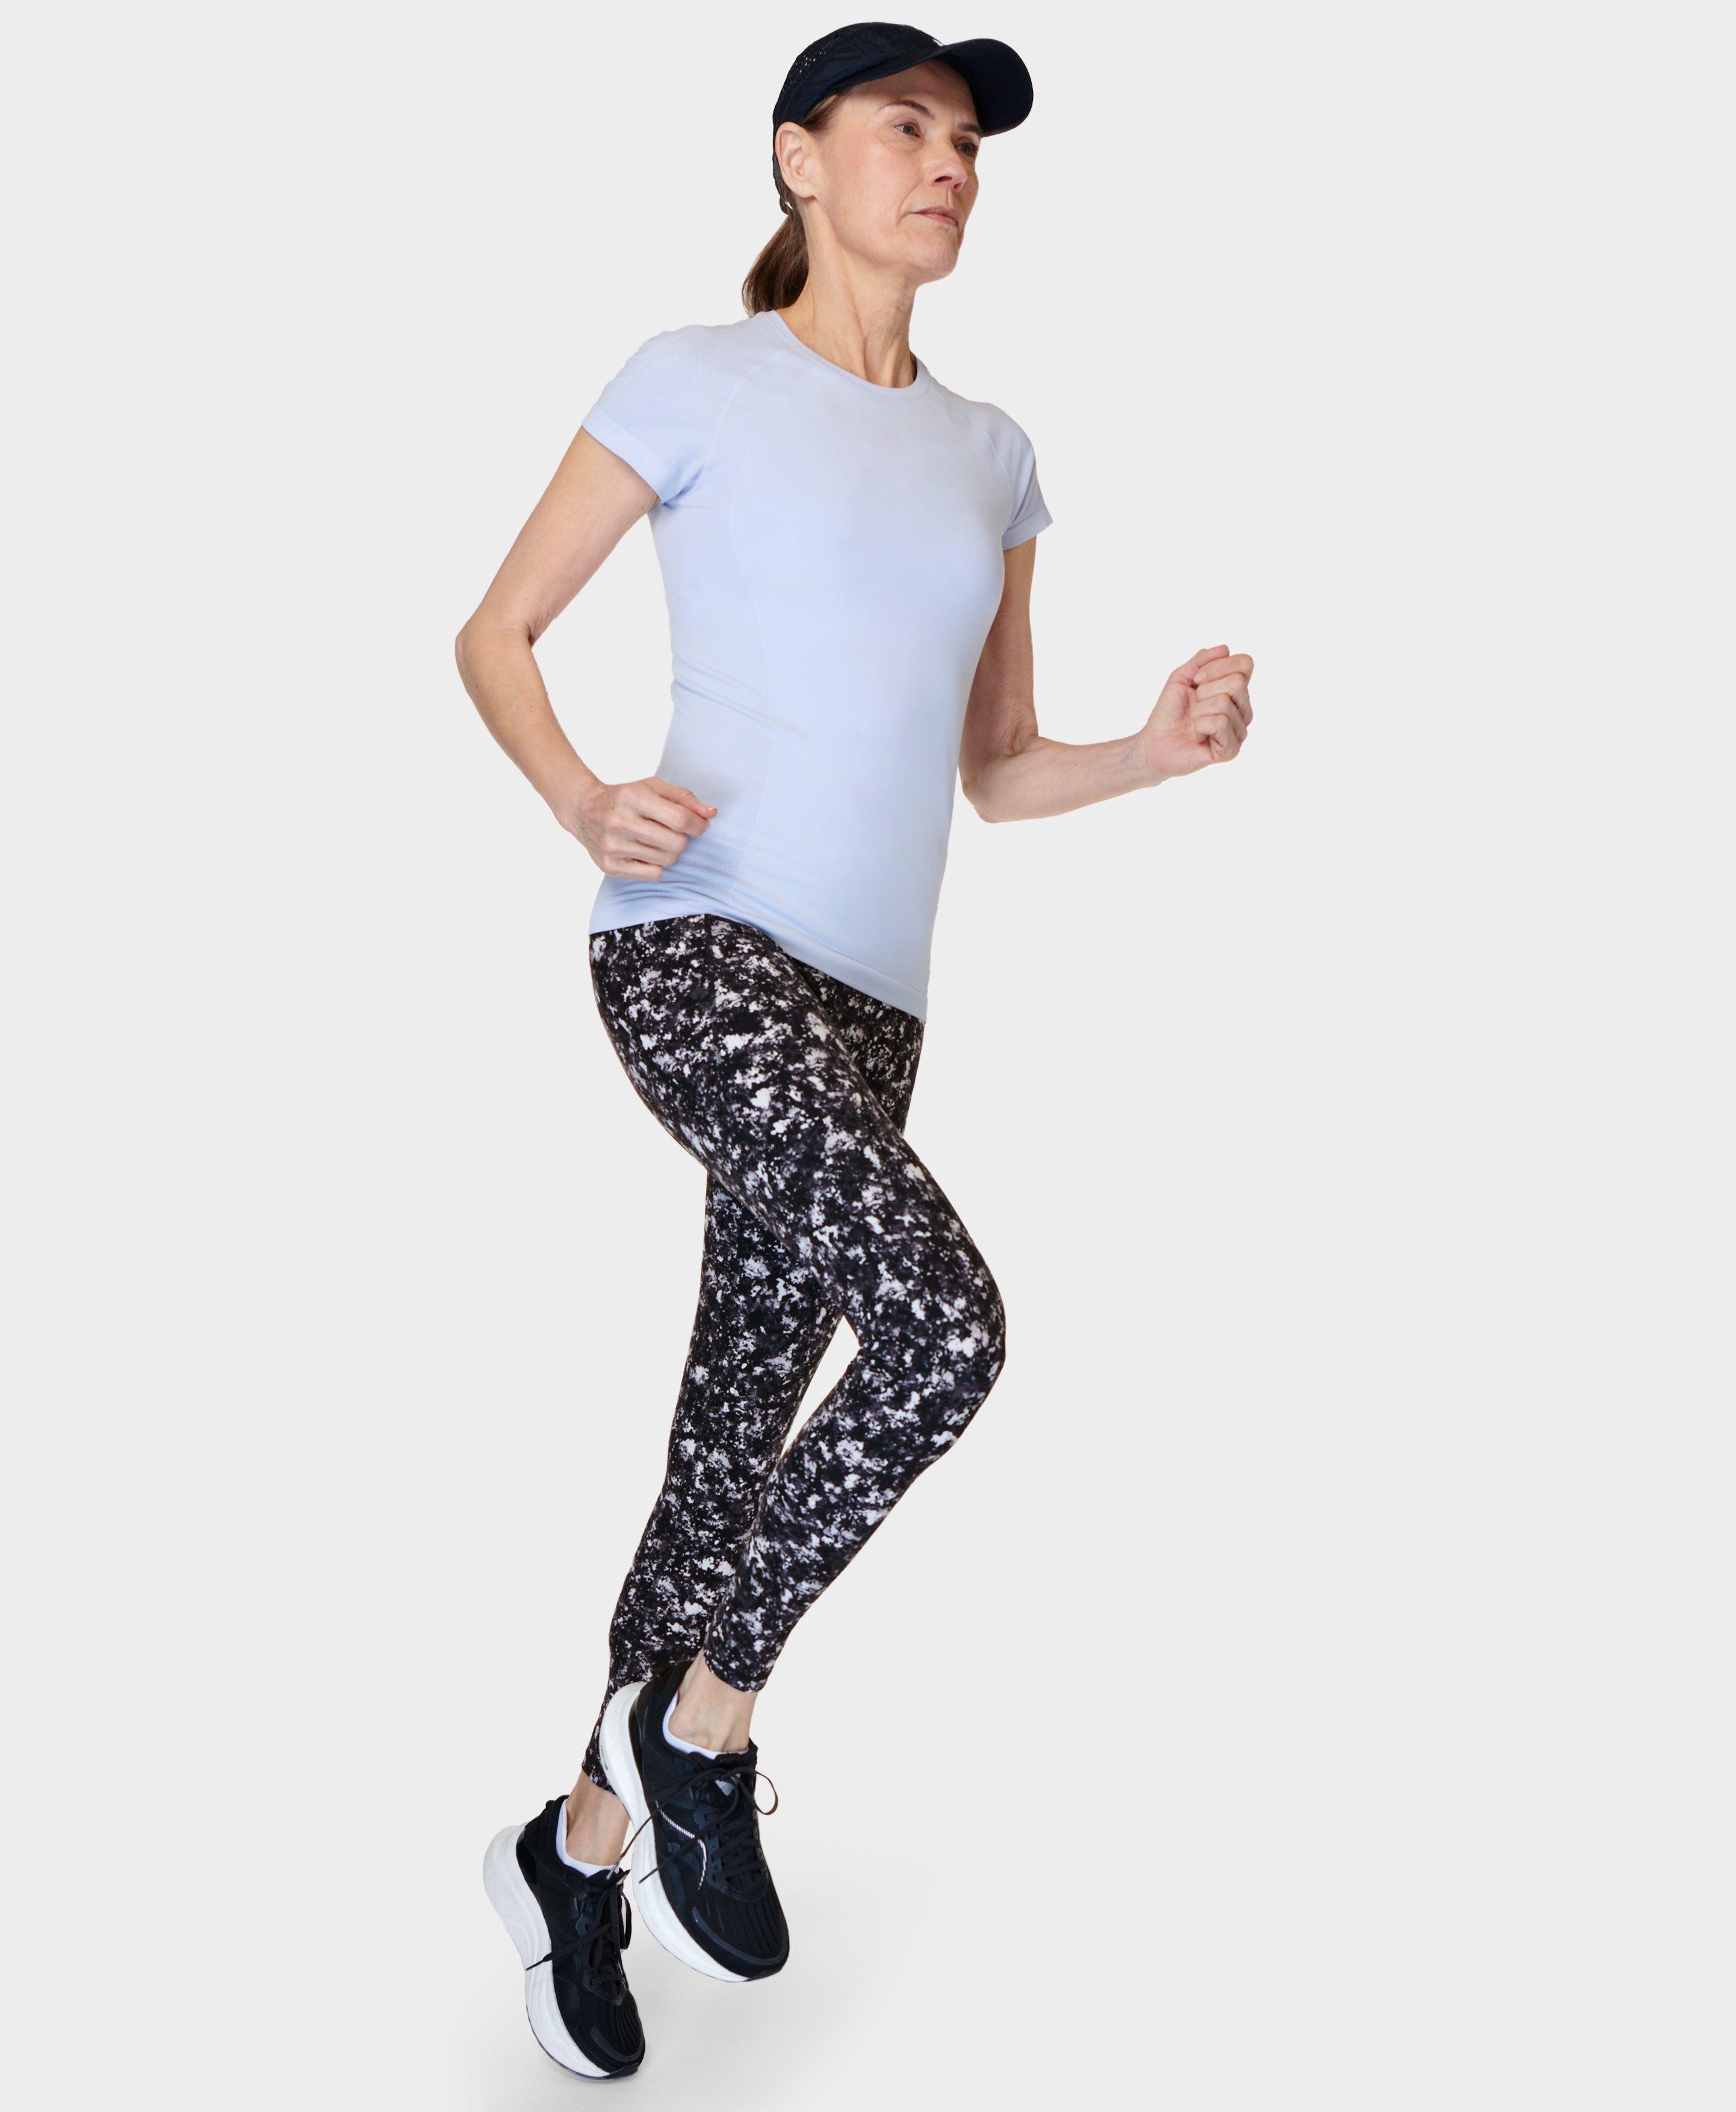 BetterZ Sexy Women Printing Gym Workout Leggings Stretchy